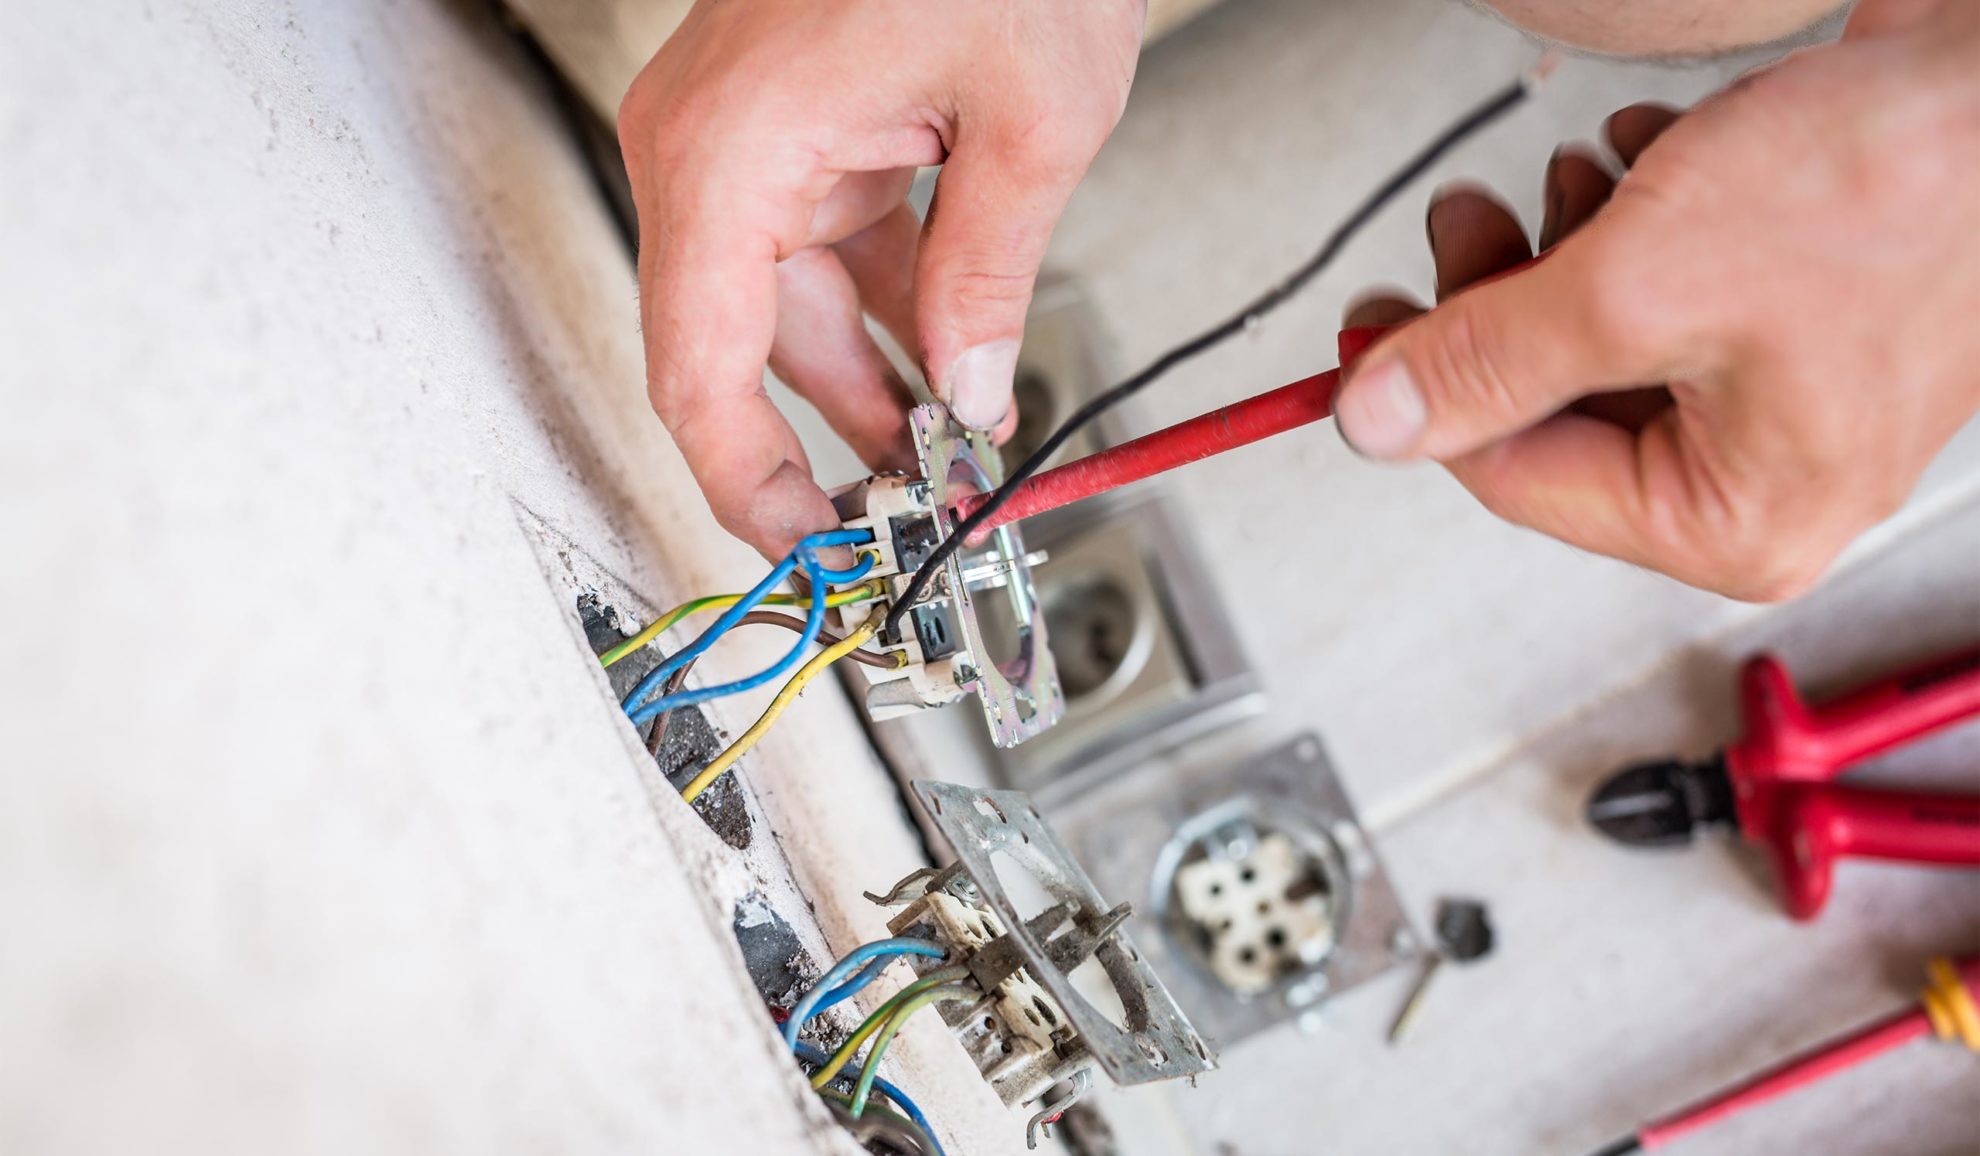 electrician-hands-close-up-installing-new-outlet-at-property-wall-auburn-ca